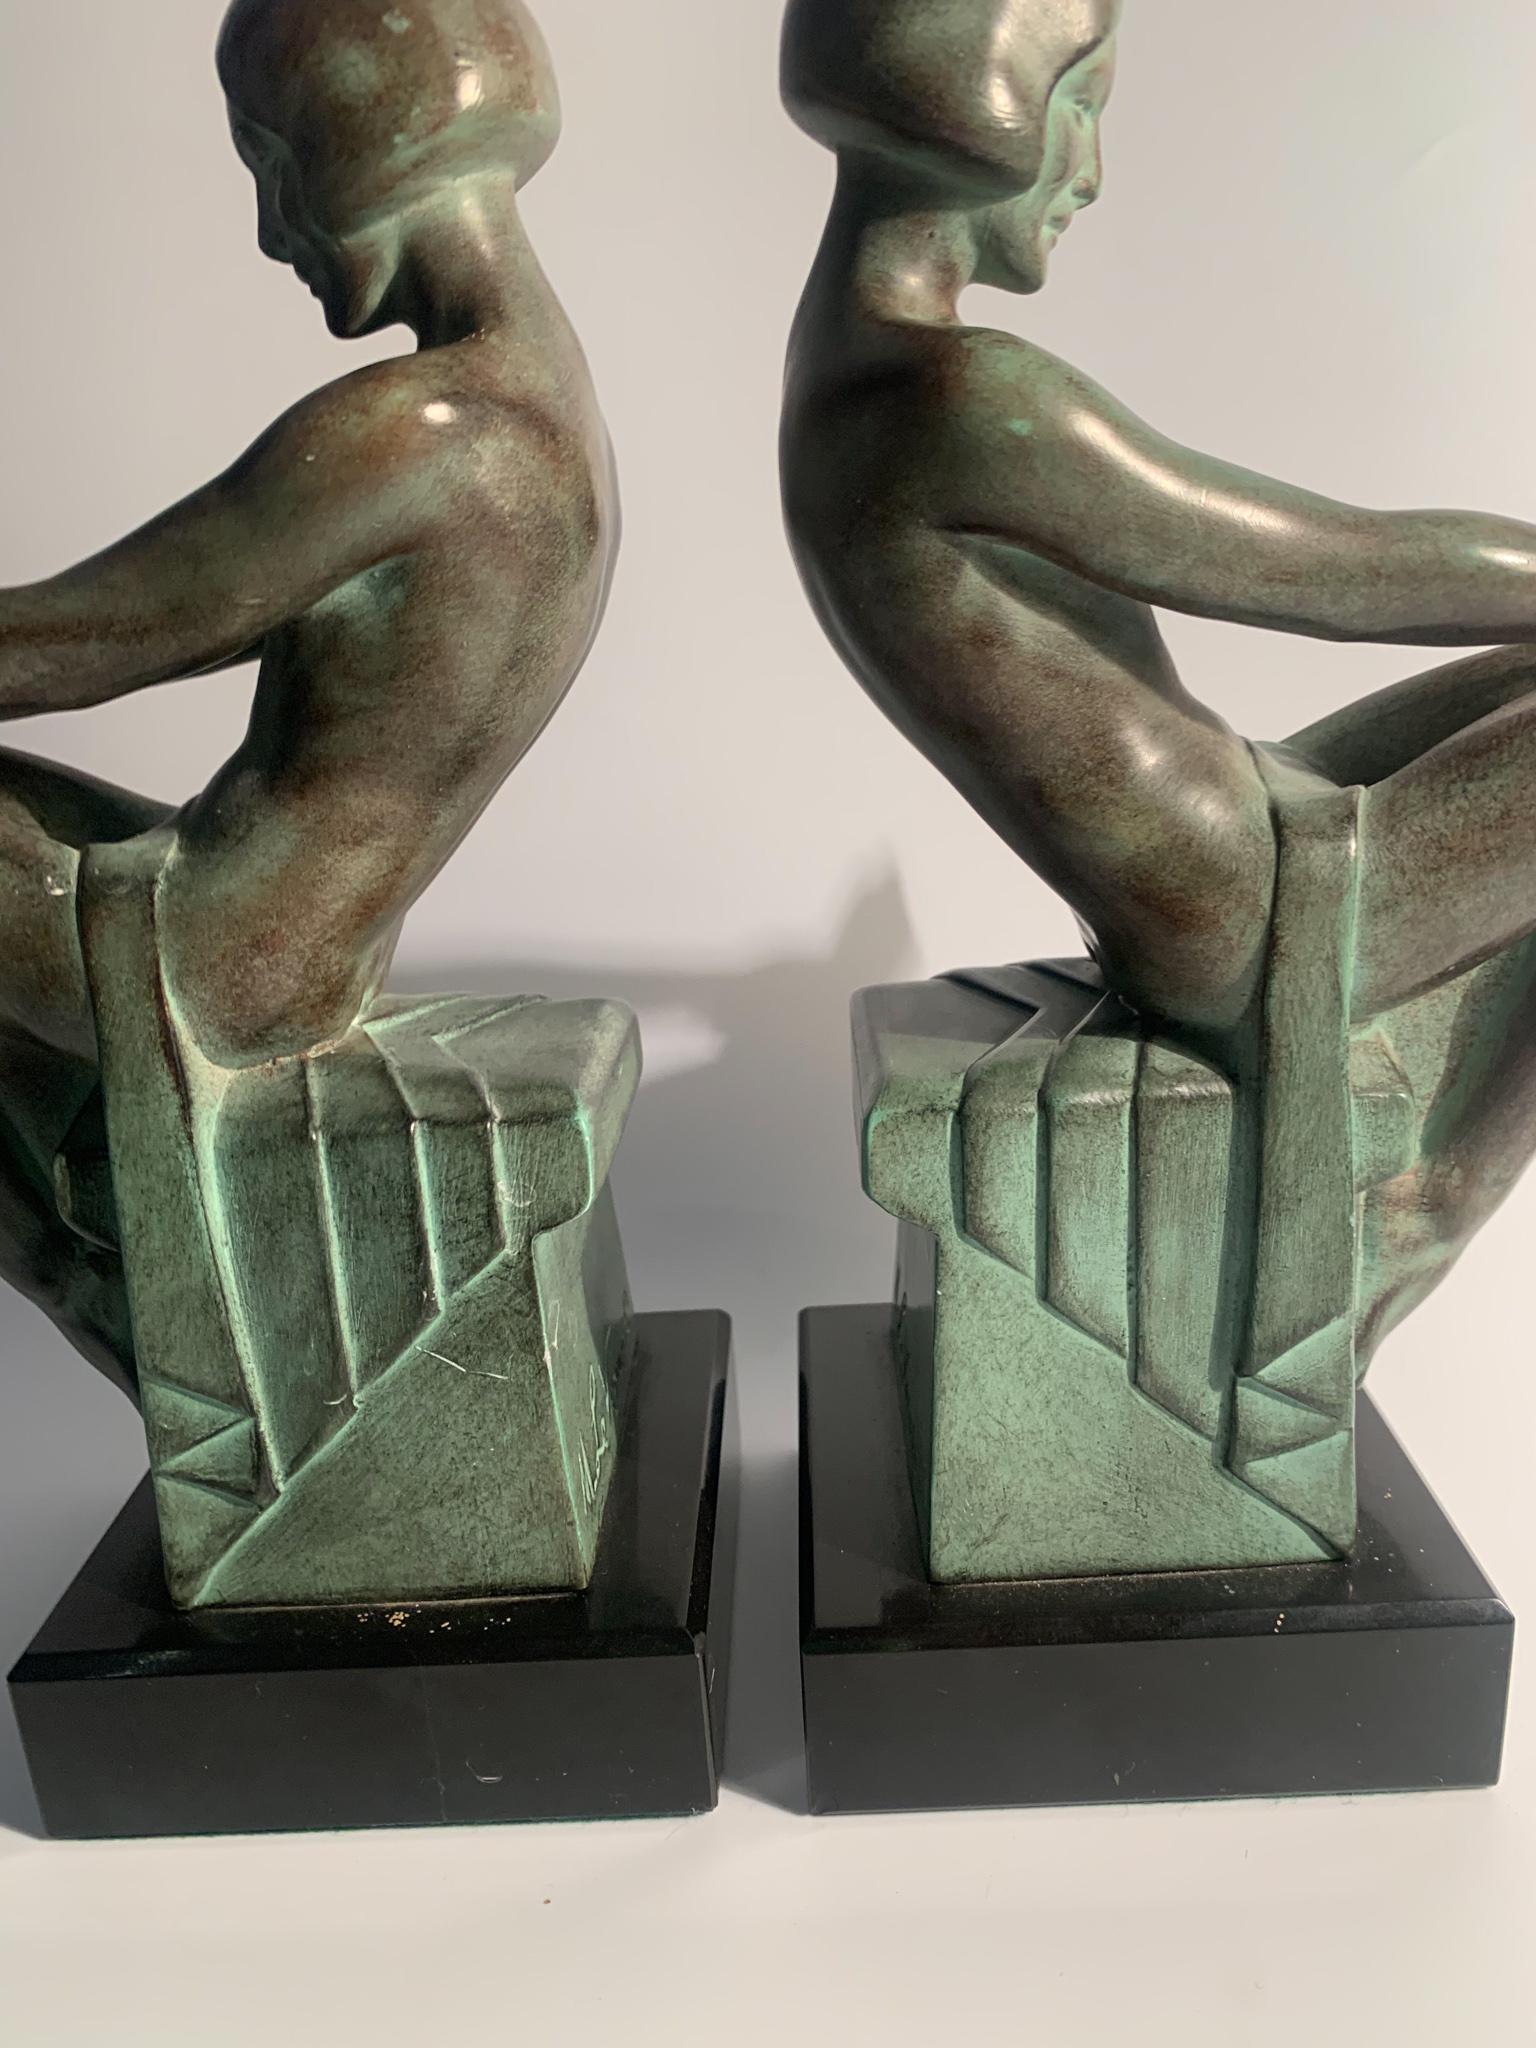 Mid-20th Century Pair Art Deco Bookends in Artistic Metal by Max Le Verrier from the 1930s